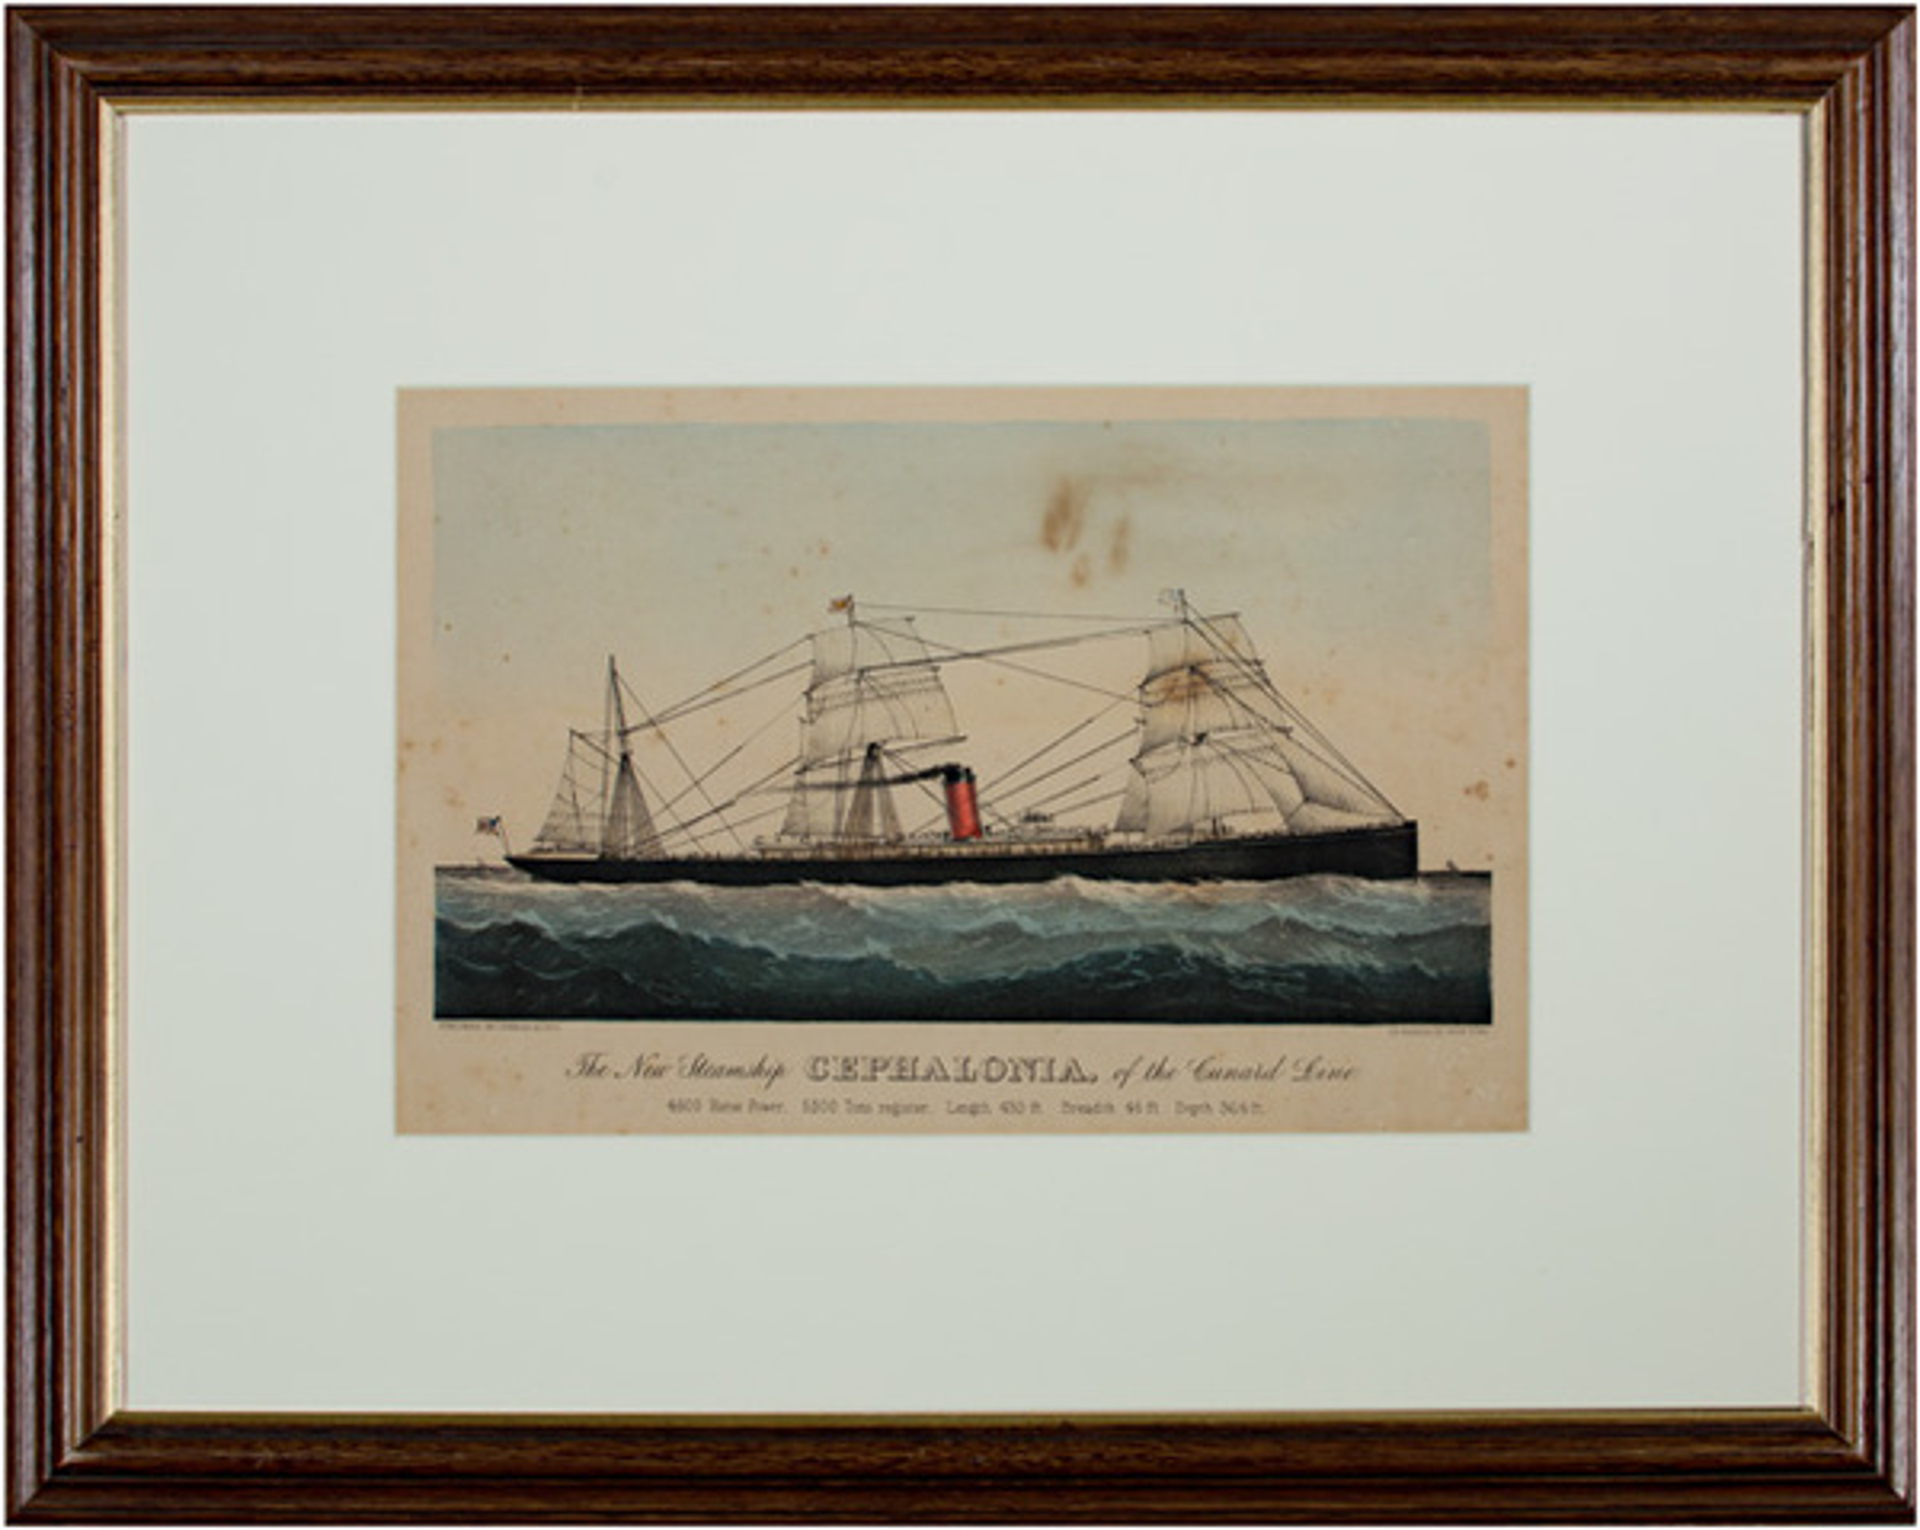 The New Steamship Cephalonia, The Cunard Line by Currier & Ives